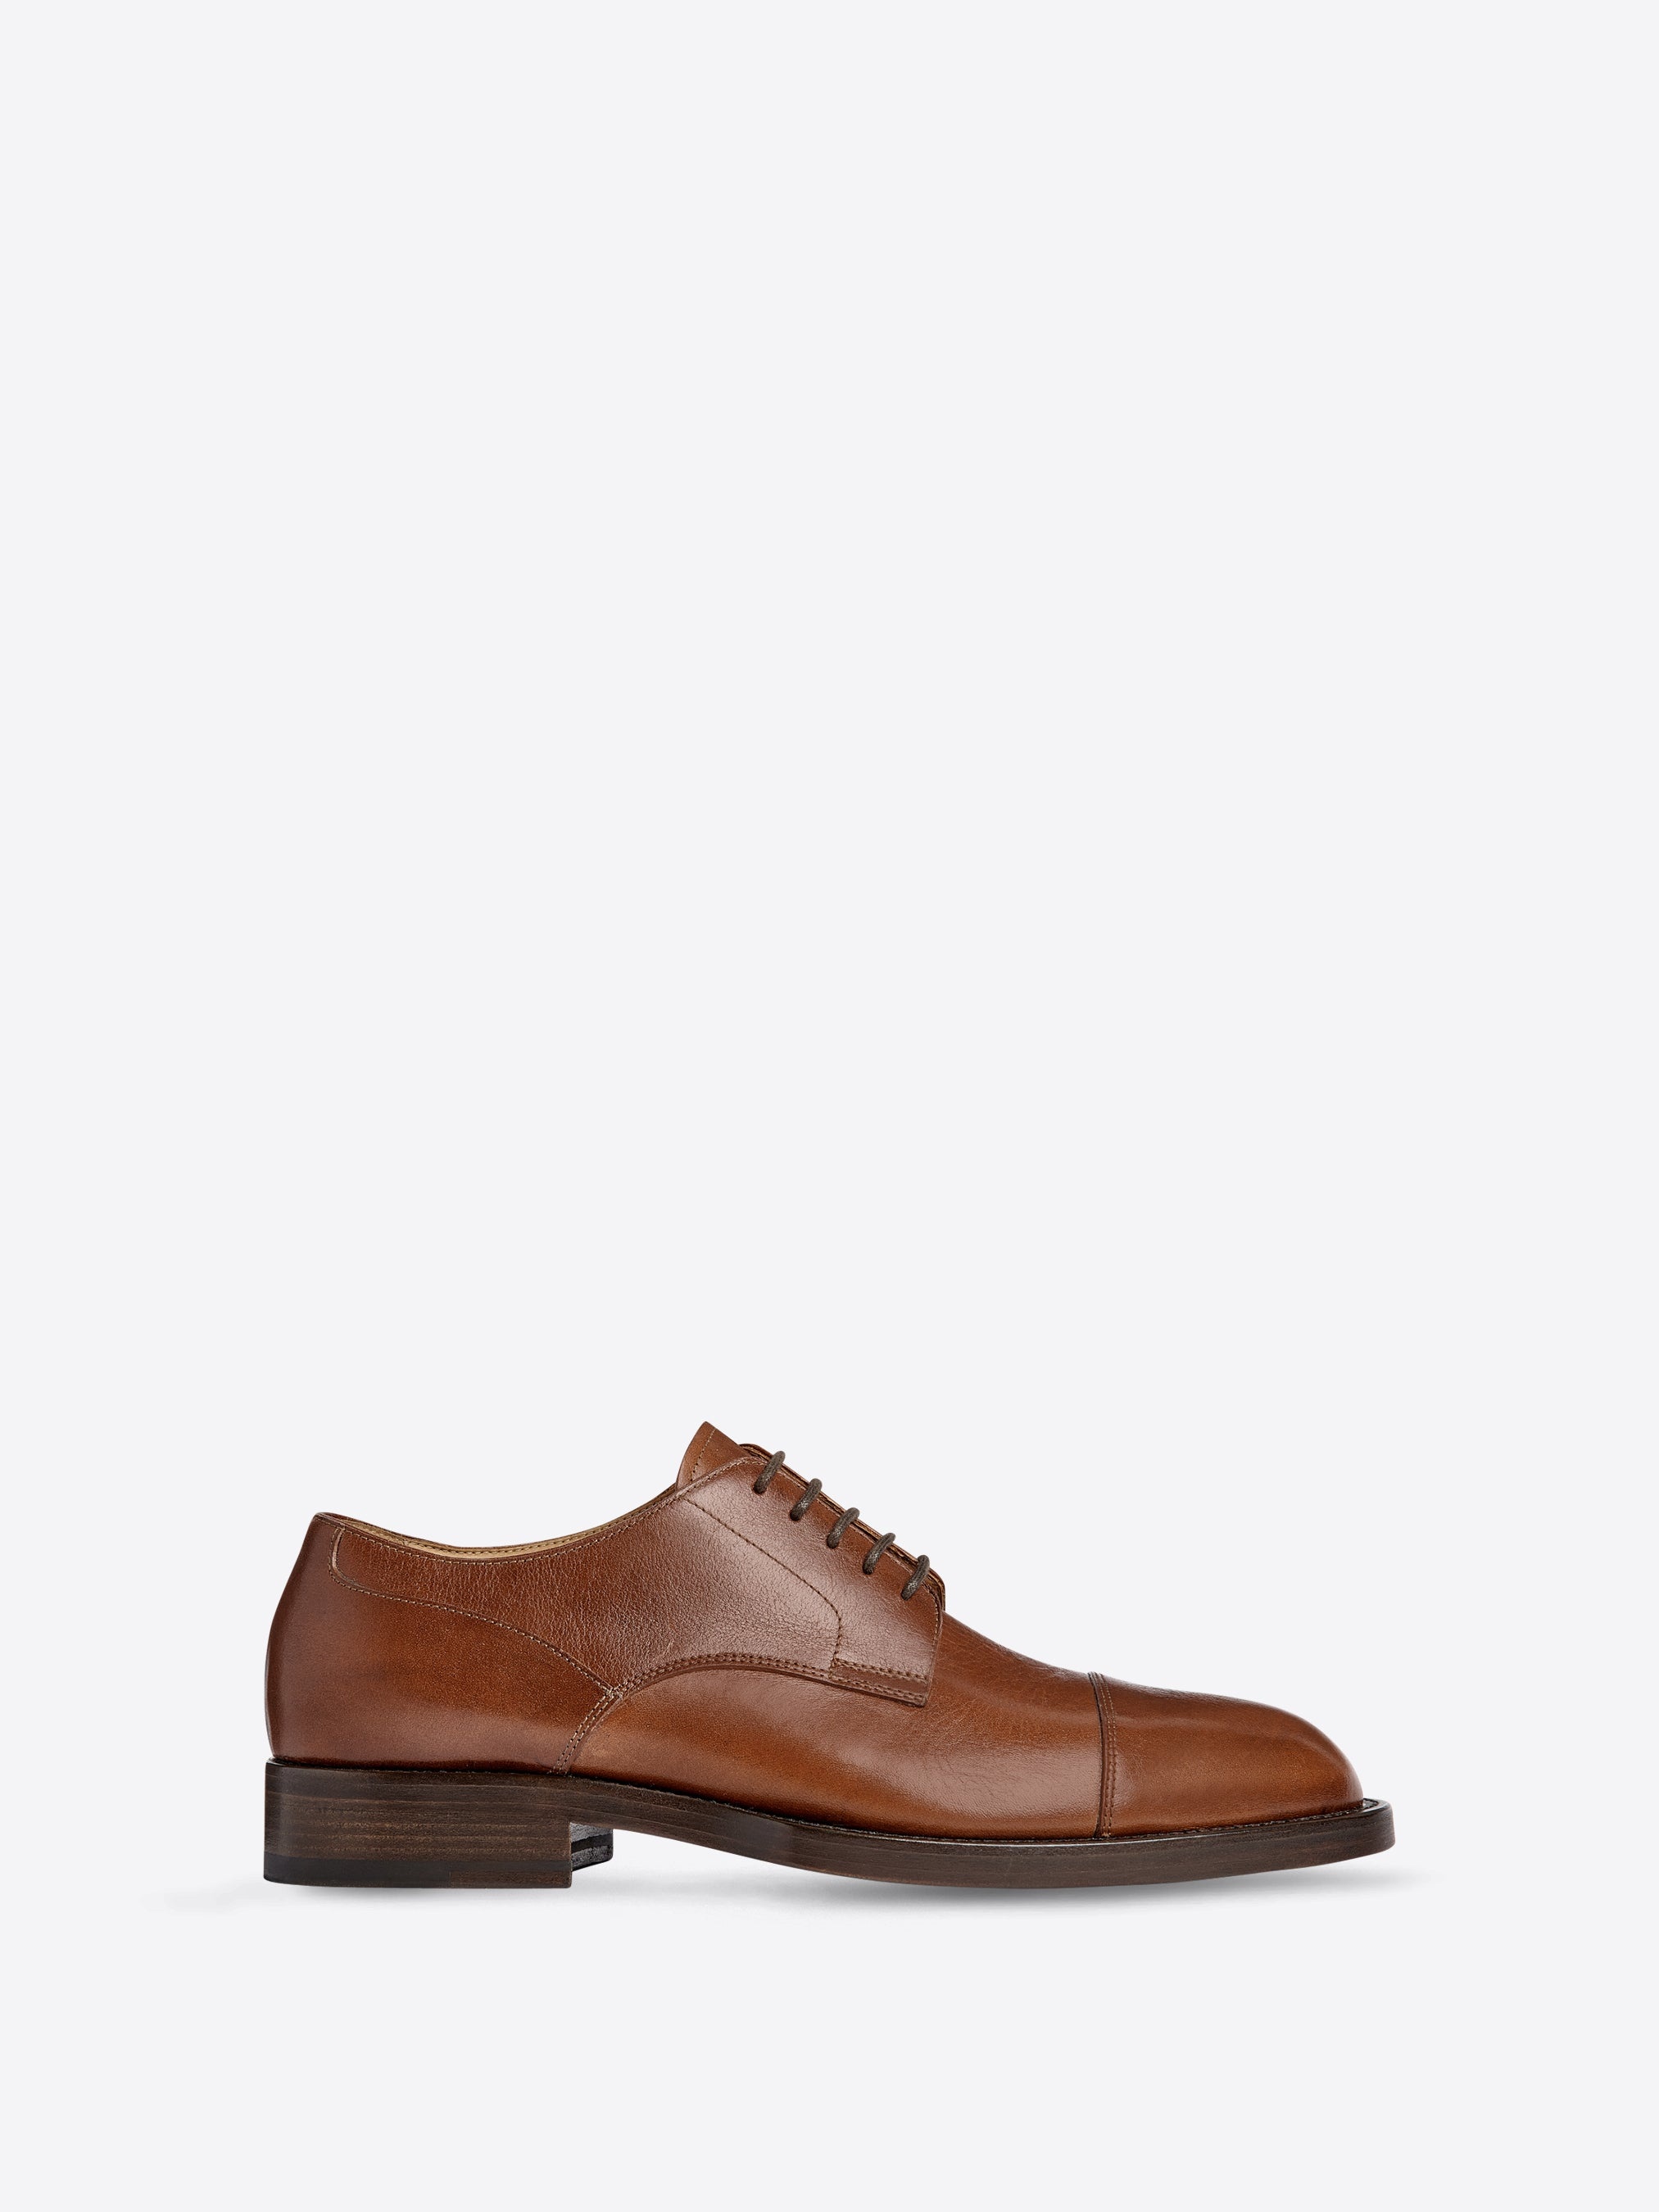 LEATHER DERBY SHOES - 2